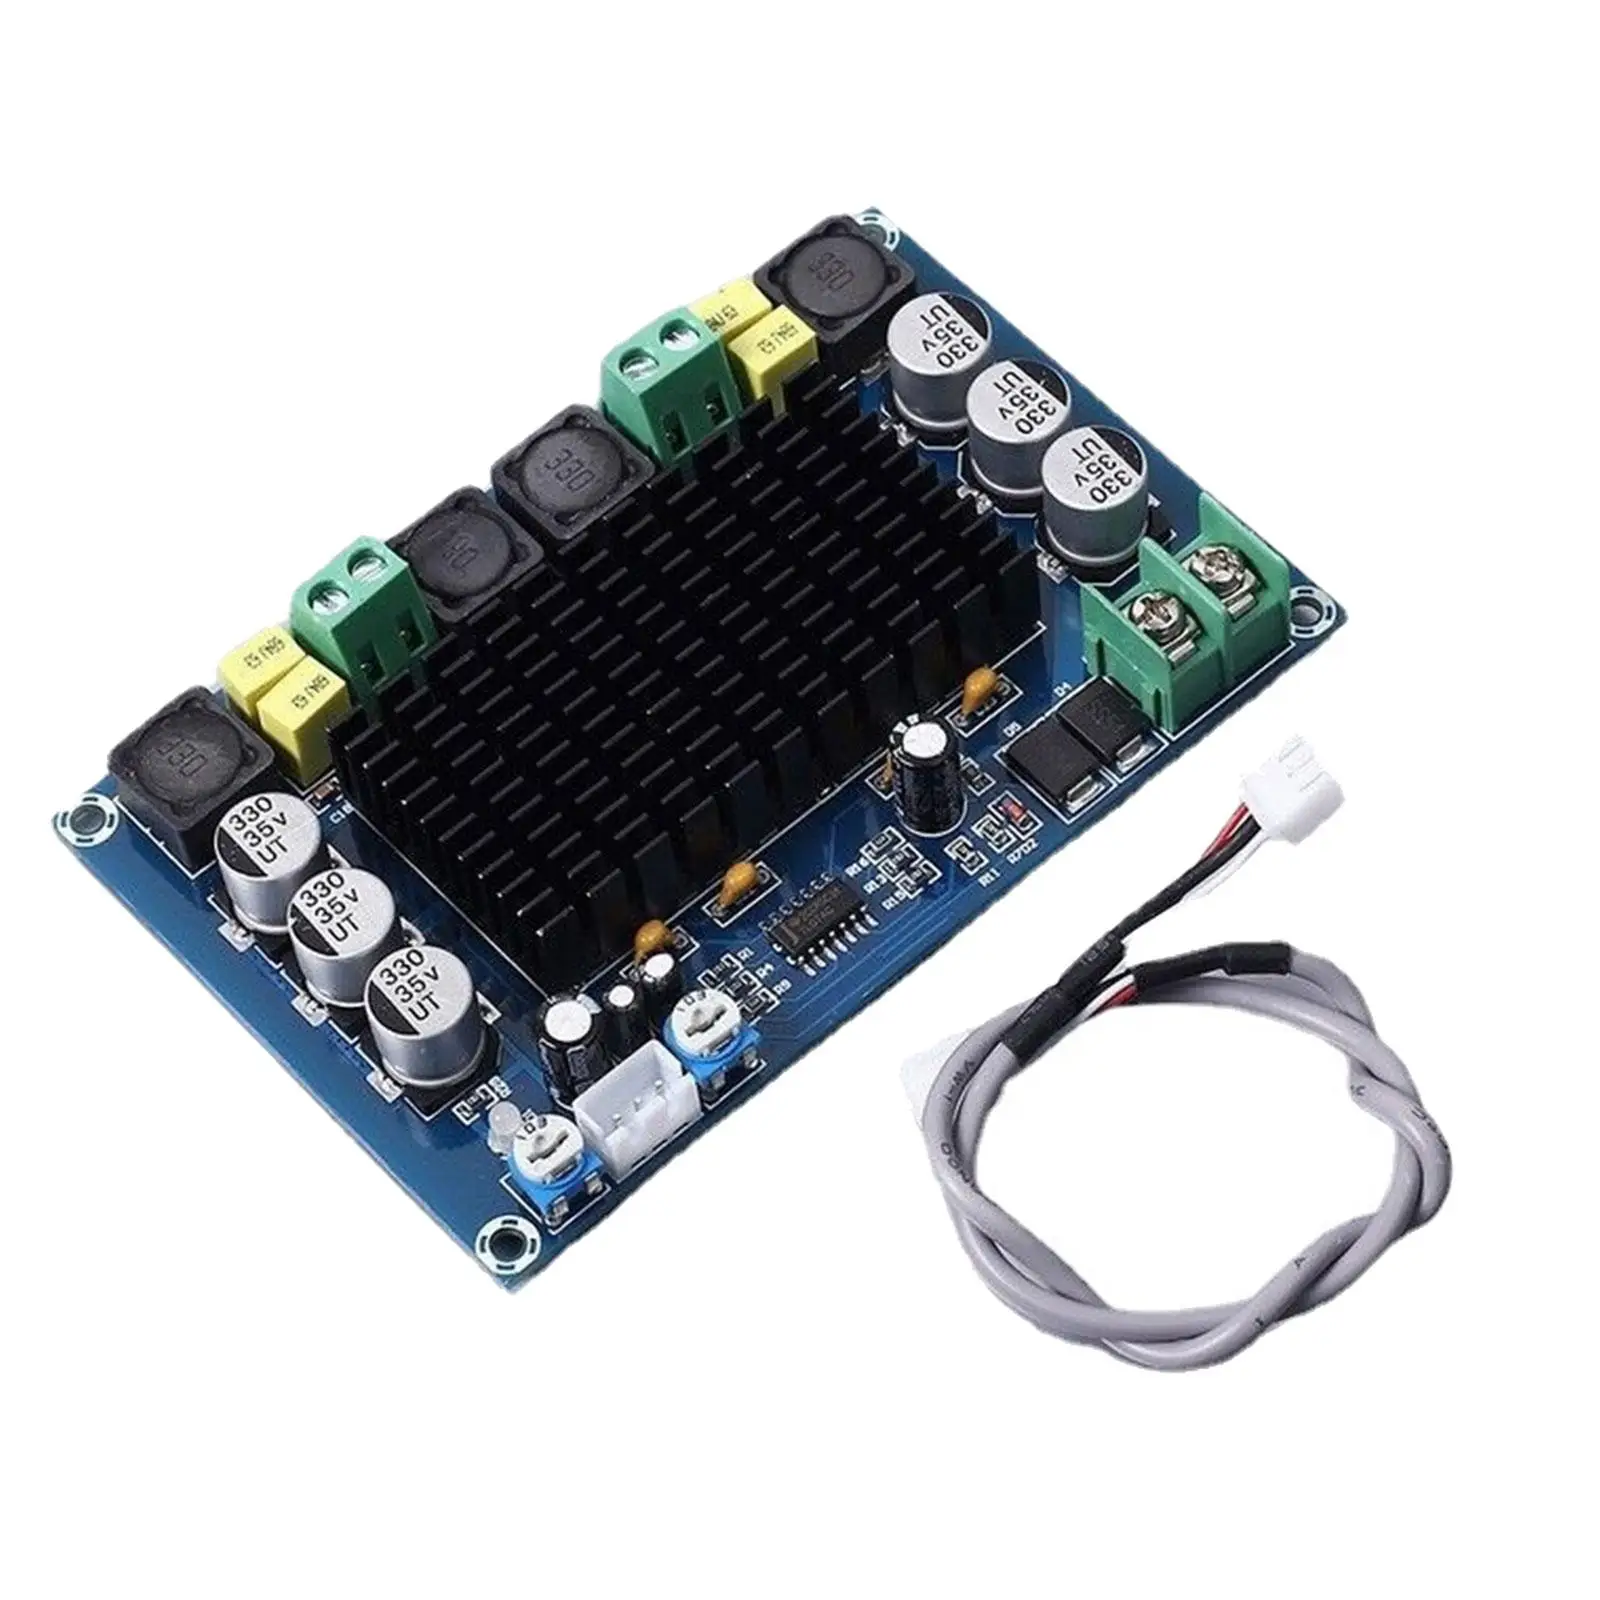 

Digital Amplifier Board 2x150W High Power Audio Stereo Amp Dual Channel for Store Home Theater Square DIY Speakers Car Speakers